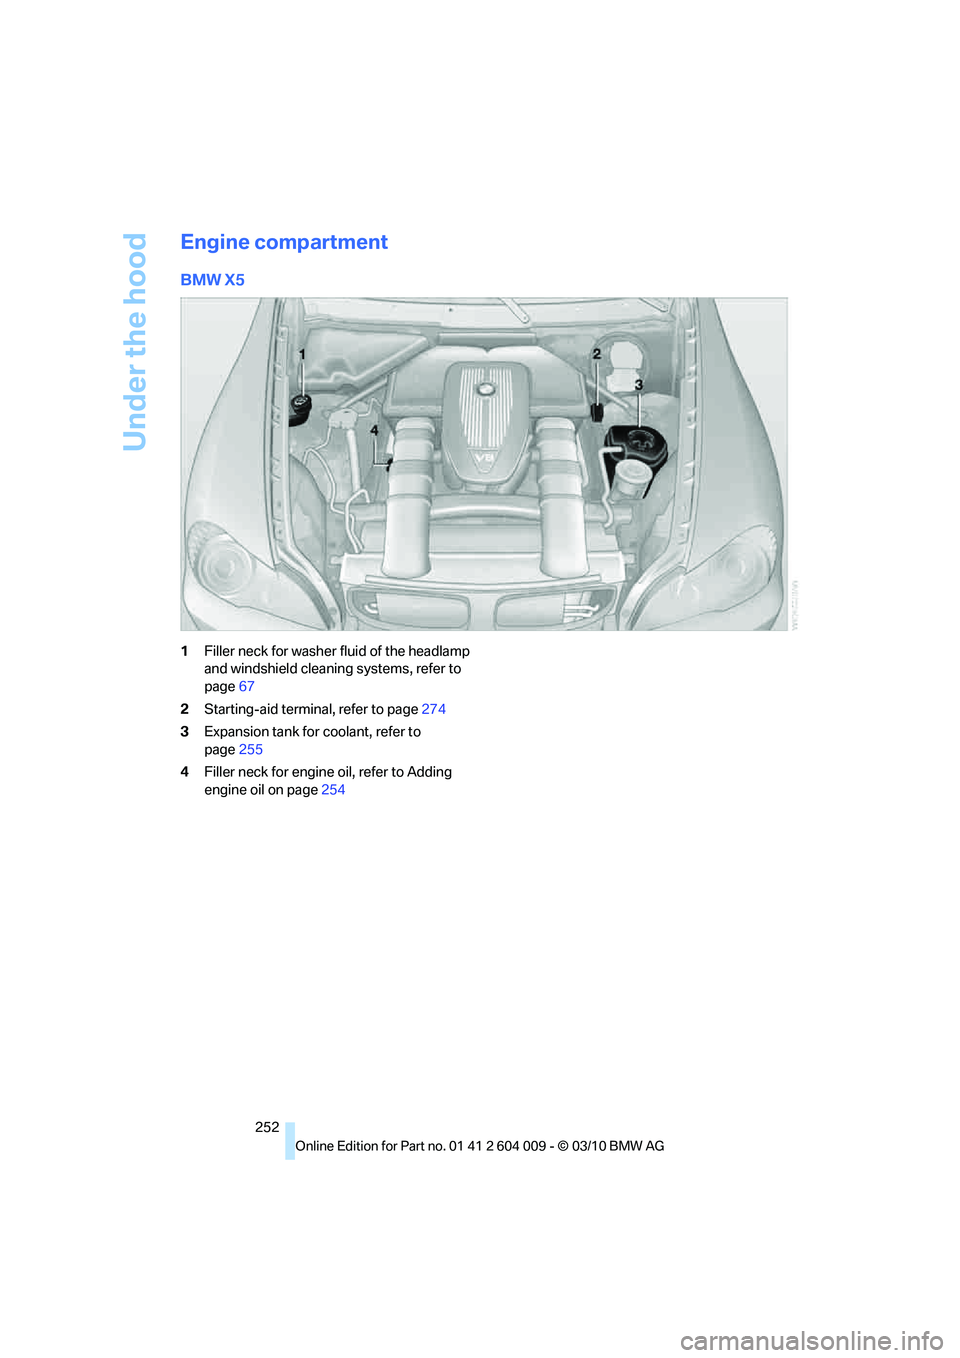 BMW X6 XDRIVE 50I 2011  Owners Manual Under the hood
252
Engine compartment
BMW X5
1Filler neck for washer fluid of the headlamp 
and windshield cleaning systems, refer to 
page67
2Starting-aid terminal, refer to page274
3Expansion tank f